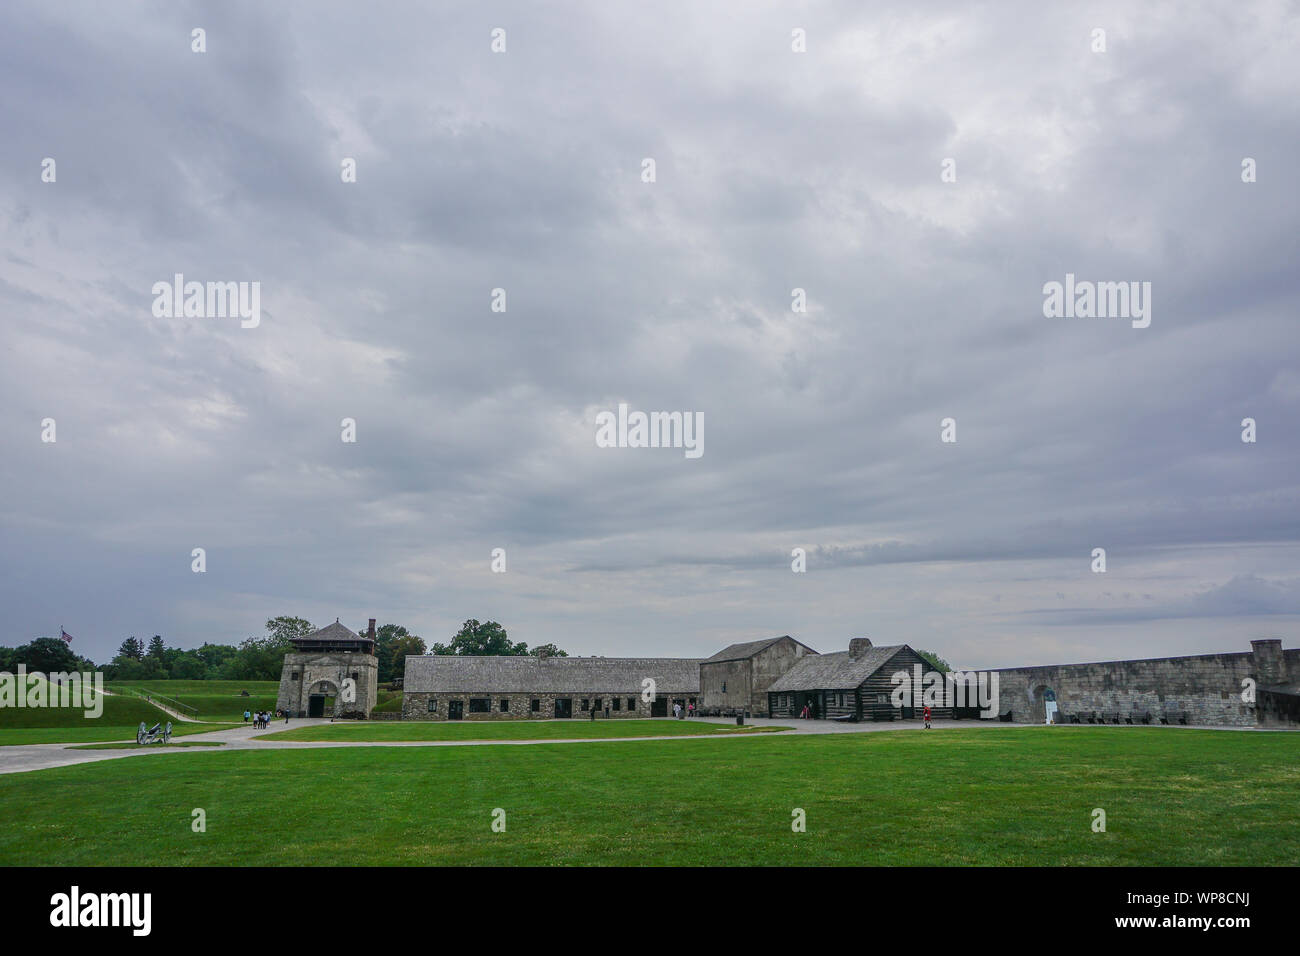 Porter, New York, USA: Visitors on the 23-acre grounds of the 18th-century Old Fort Niagara, on a cloudy day. Stock Photo